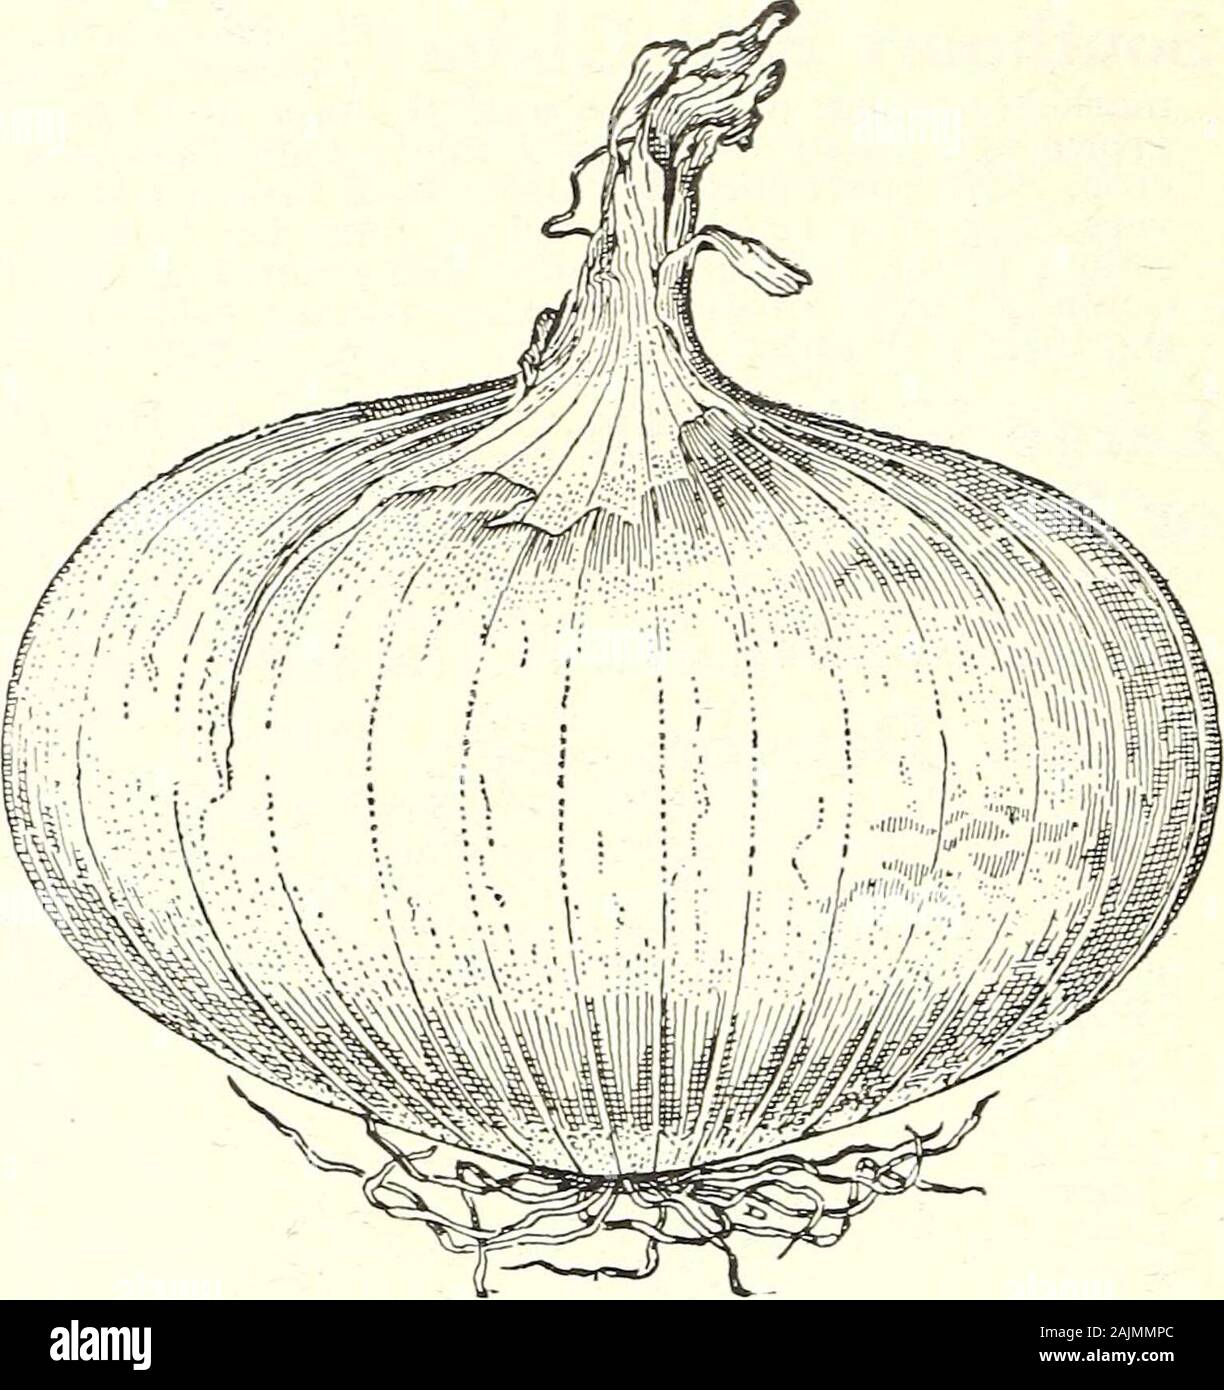 Seed annual 1908 . Mammoth Yellow Spanish, or Prizetaker White Portugal IMPORTED ONIONS The flavor of the Italian varieties is mild and they are inevery way well adapted to culinary purposes. The follow-ing varieties have been tested in this country and havegiven perfect satisfaction. Qiifk^n An extra early, very white skinned variety ofuccii especial value for pickling. If seed is sownout of doors in spring it will produce bulbs about an inchin diameter. If these bulbs are set out the followingspring, or if plants are grown under glass in winter andset out in the spring, they will produce lar Stock Photo